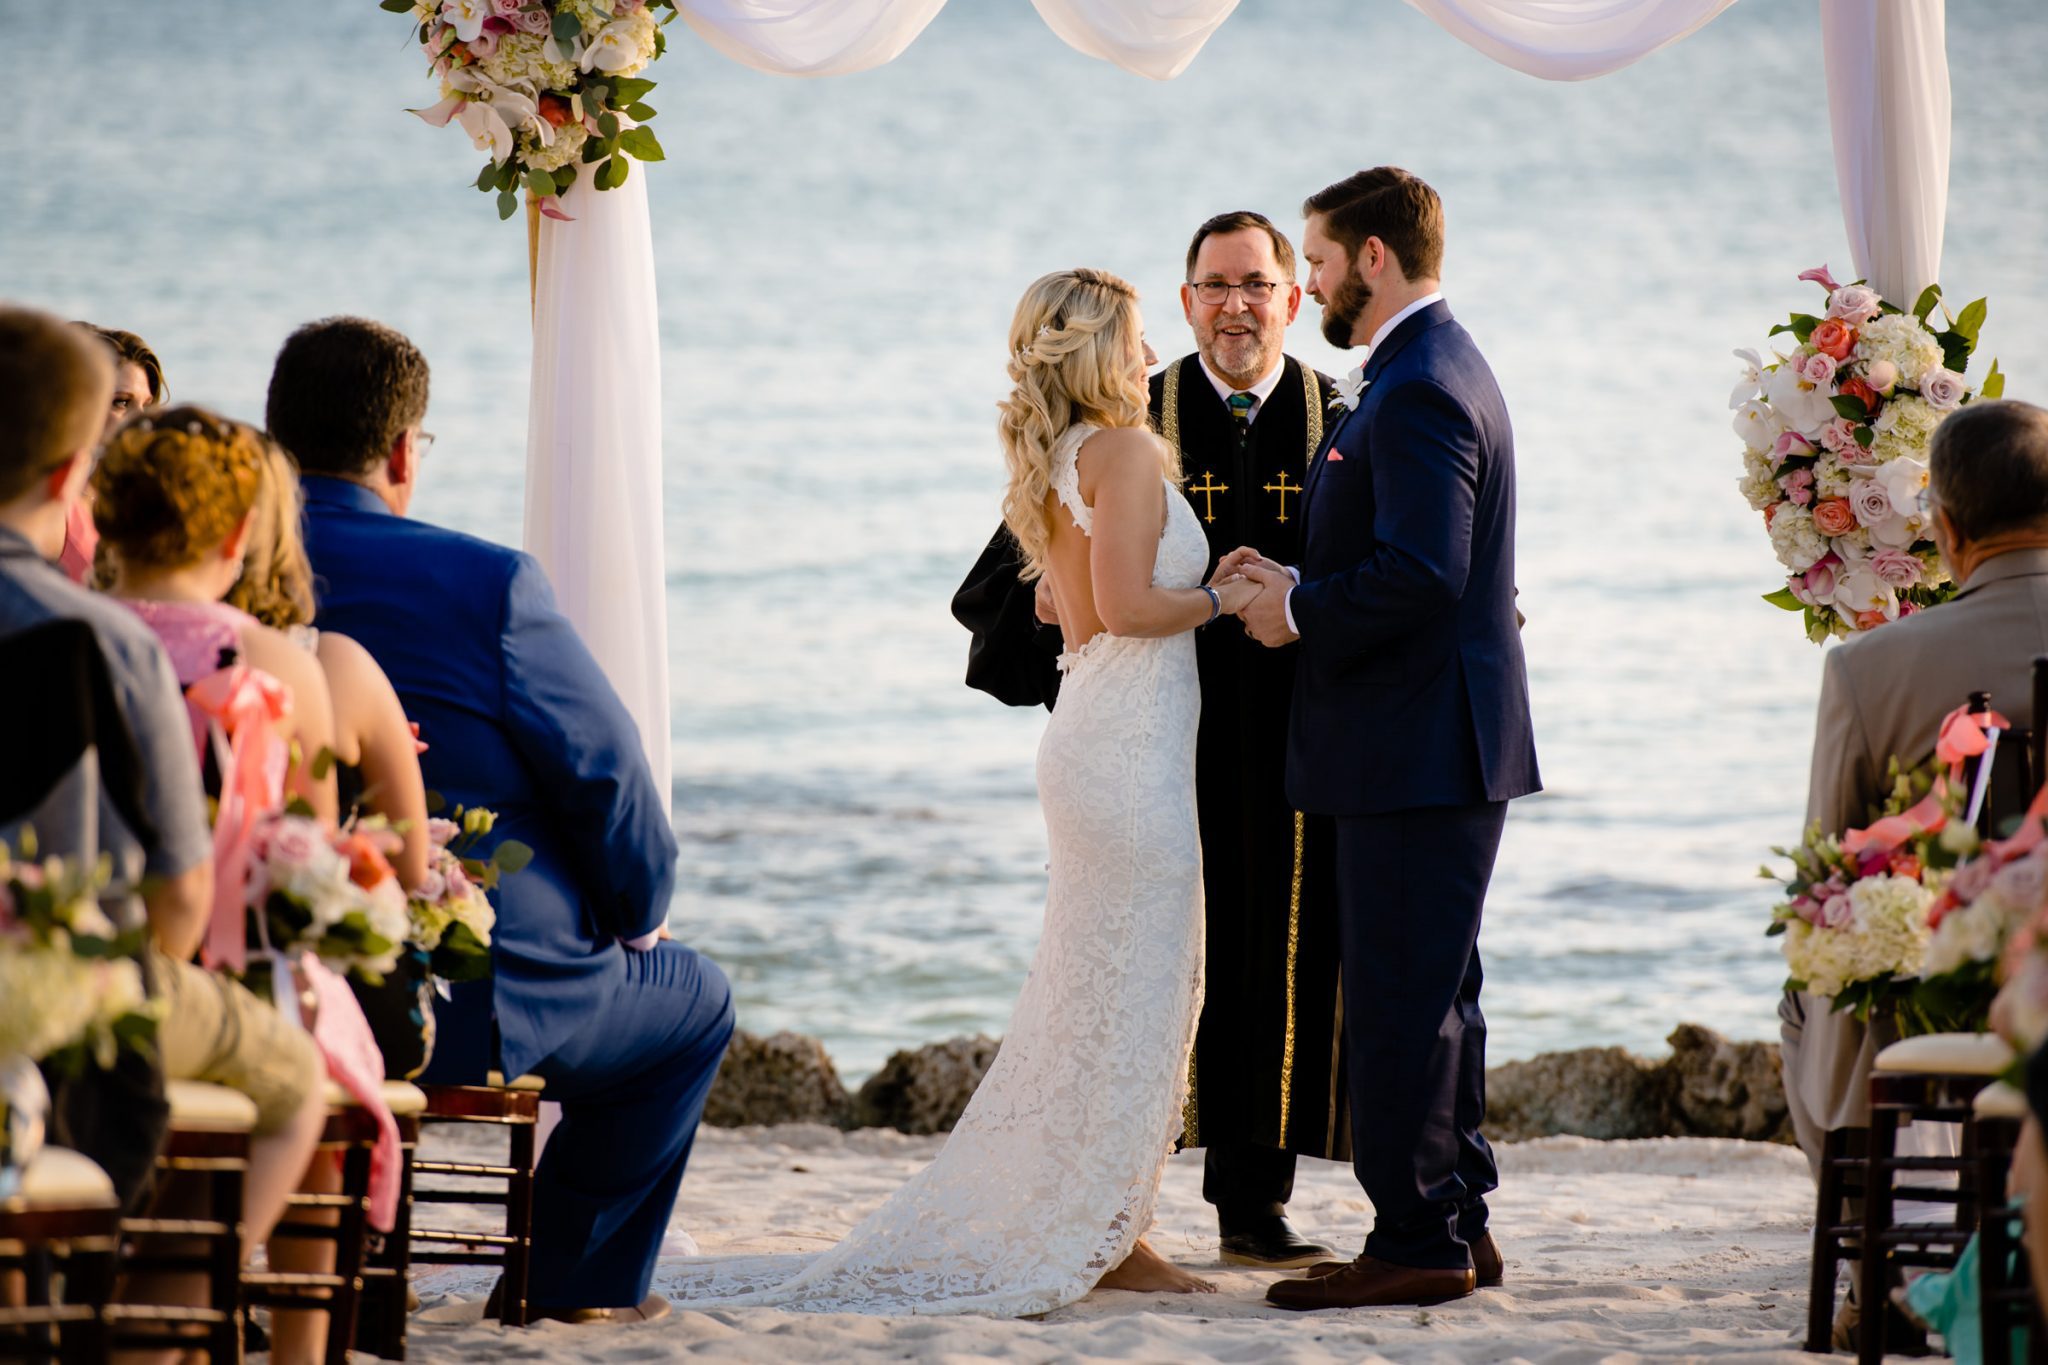 A bride and groom exchange vows on the beach.